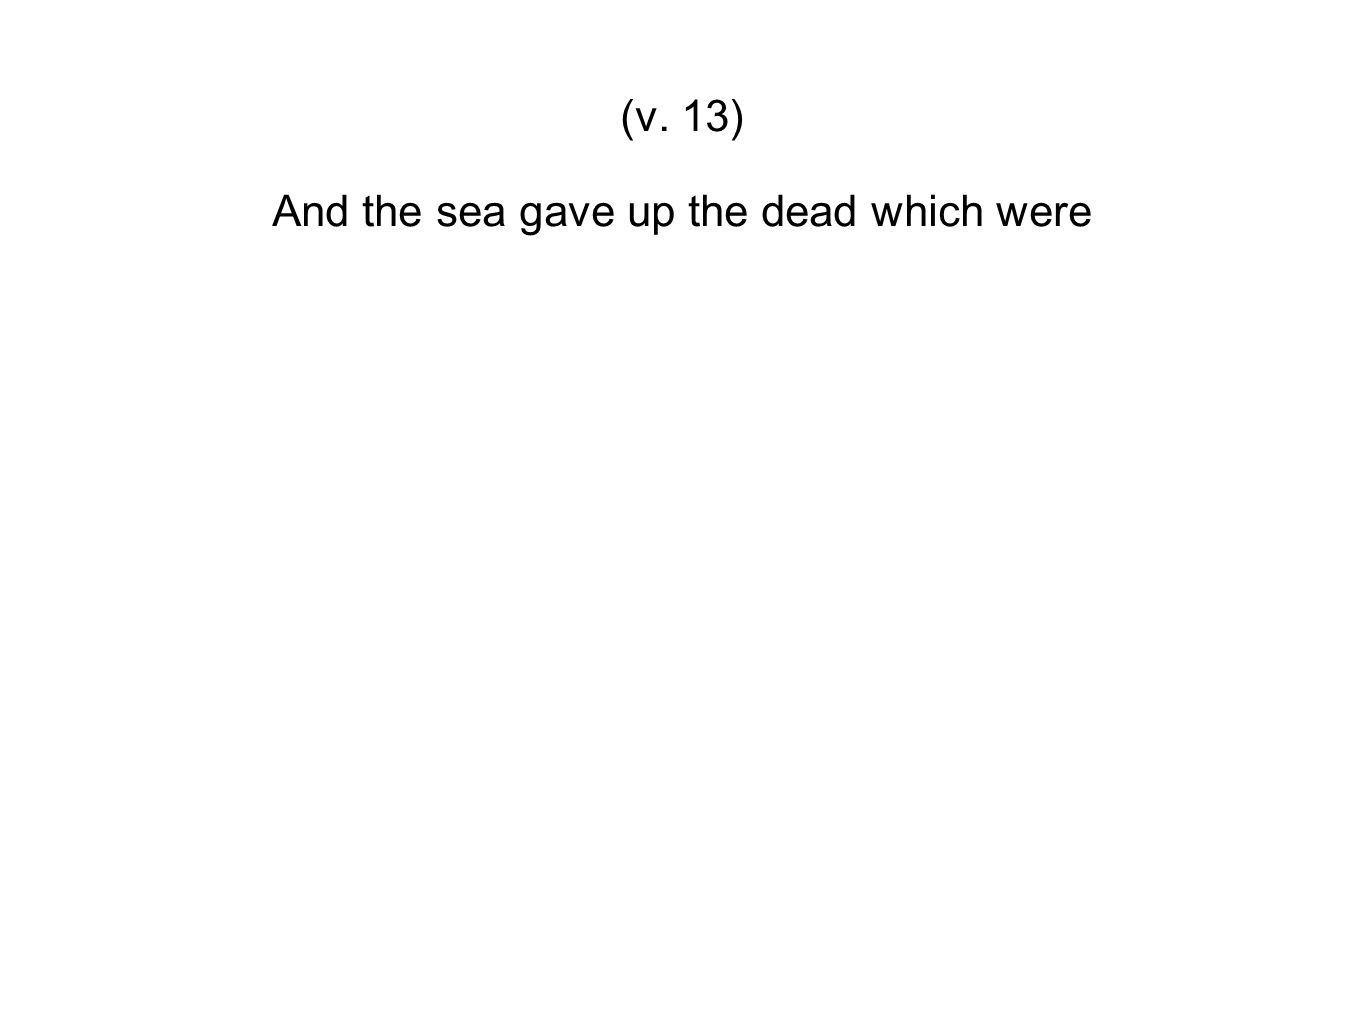 And the sea gave up the dead which were